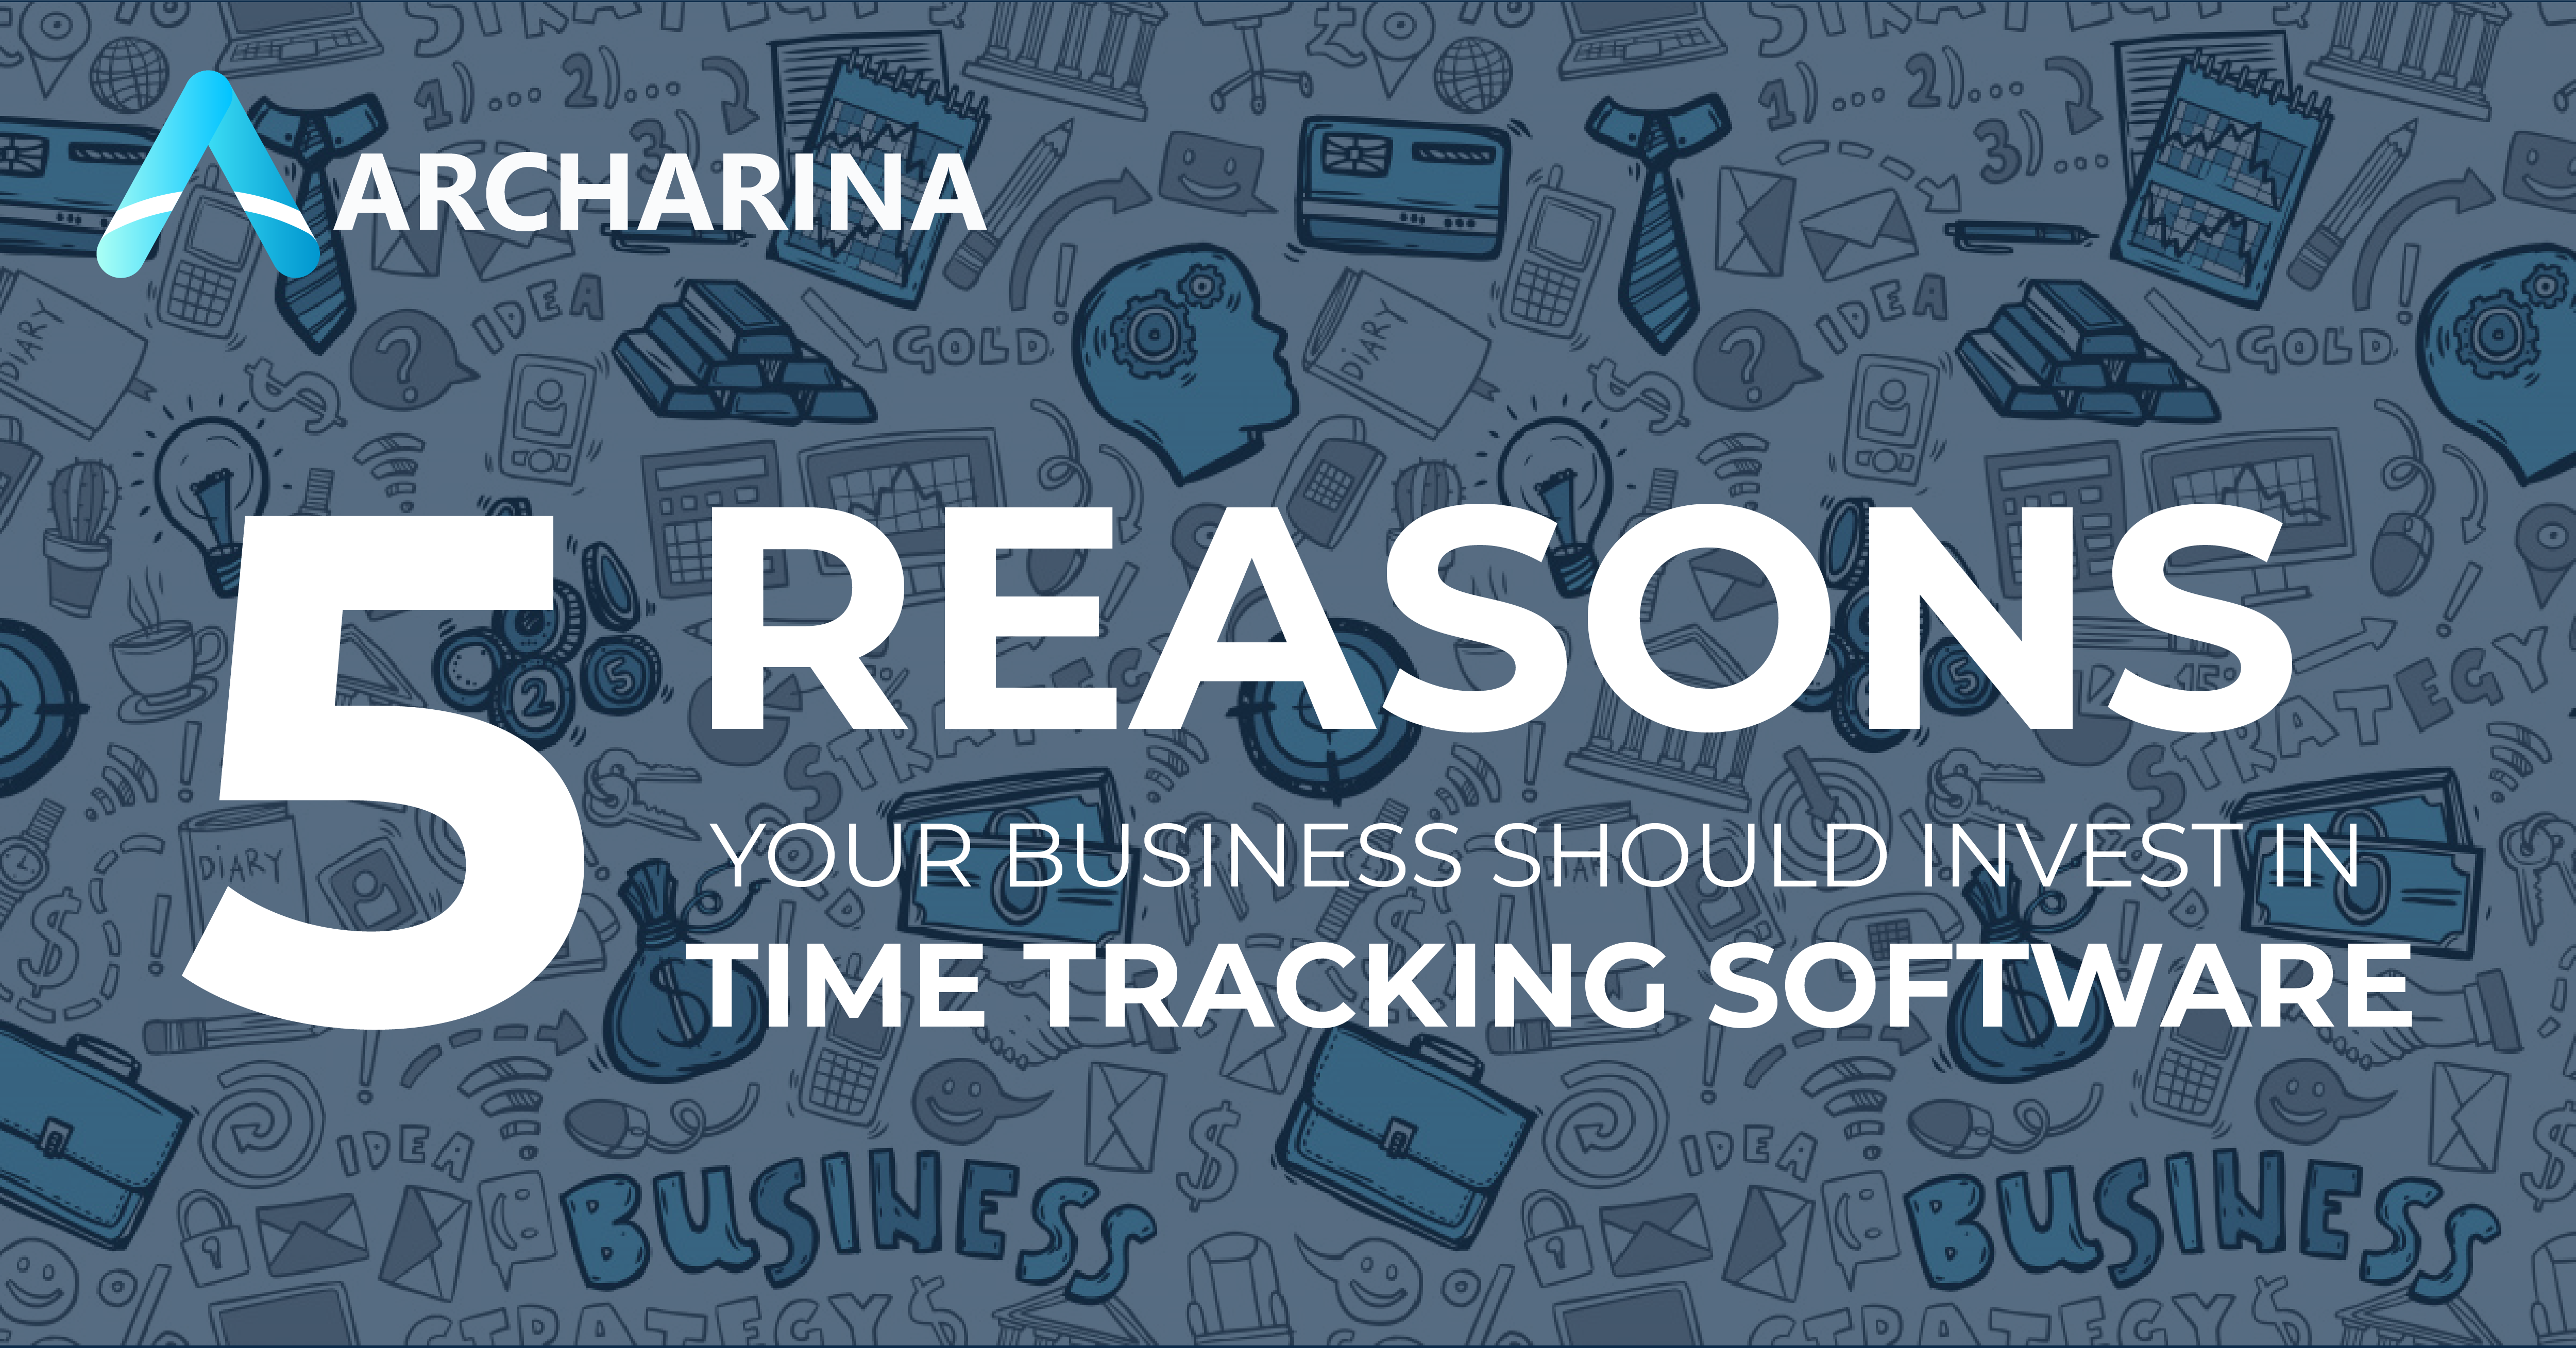 5 Reasons Your Business Should Invest in Time Tracking Software